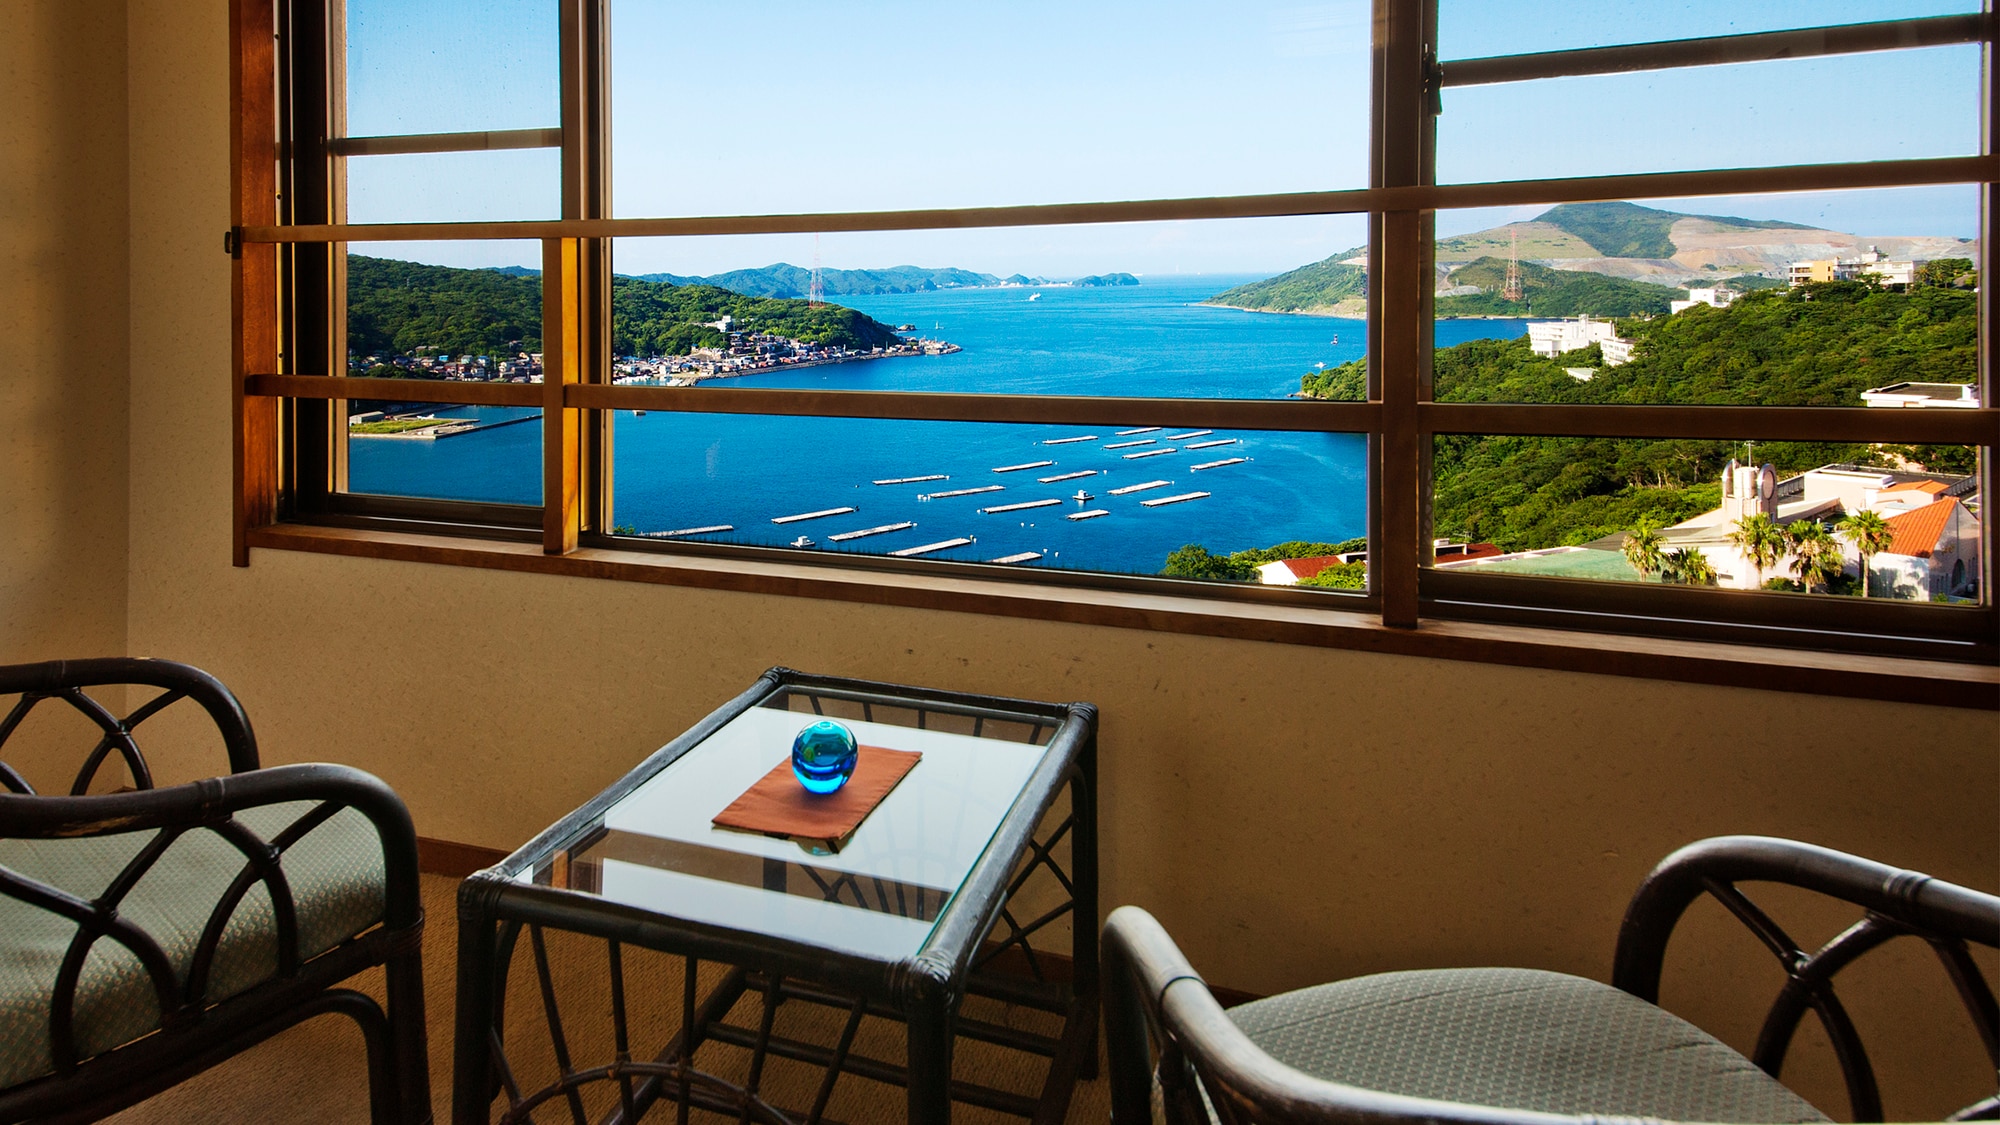 [View from the guest room] A magnificent view that changes its expression every moment while overlooking Toba Bay